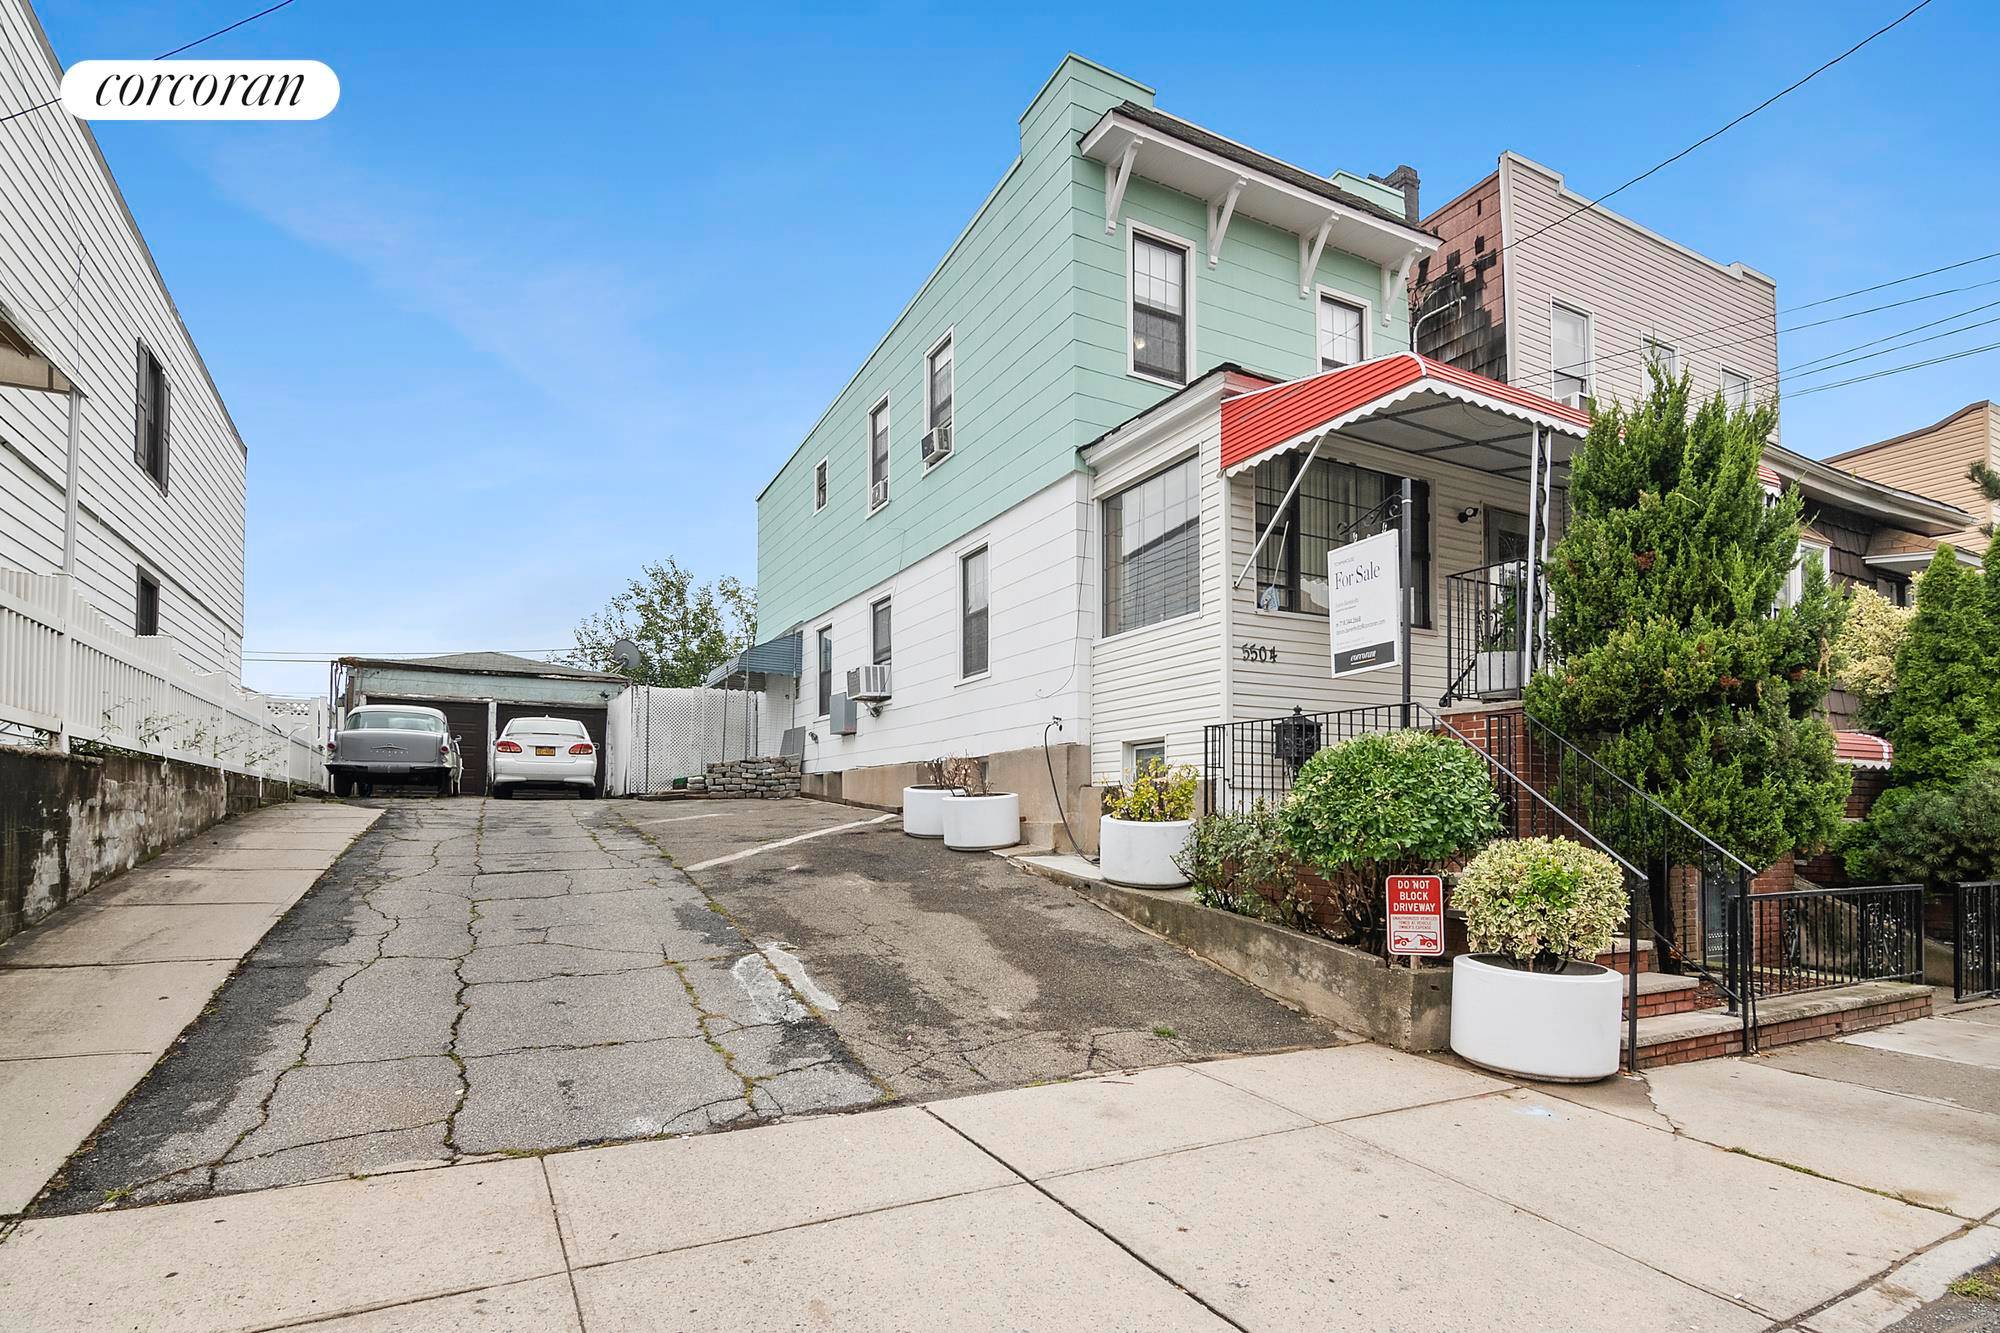 Located in the heart of Maspeth 55 04 69th Lane is a fully detached single family home that sits on a spacious 45ft x 90ft lot.